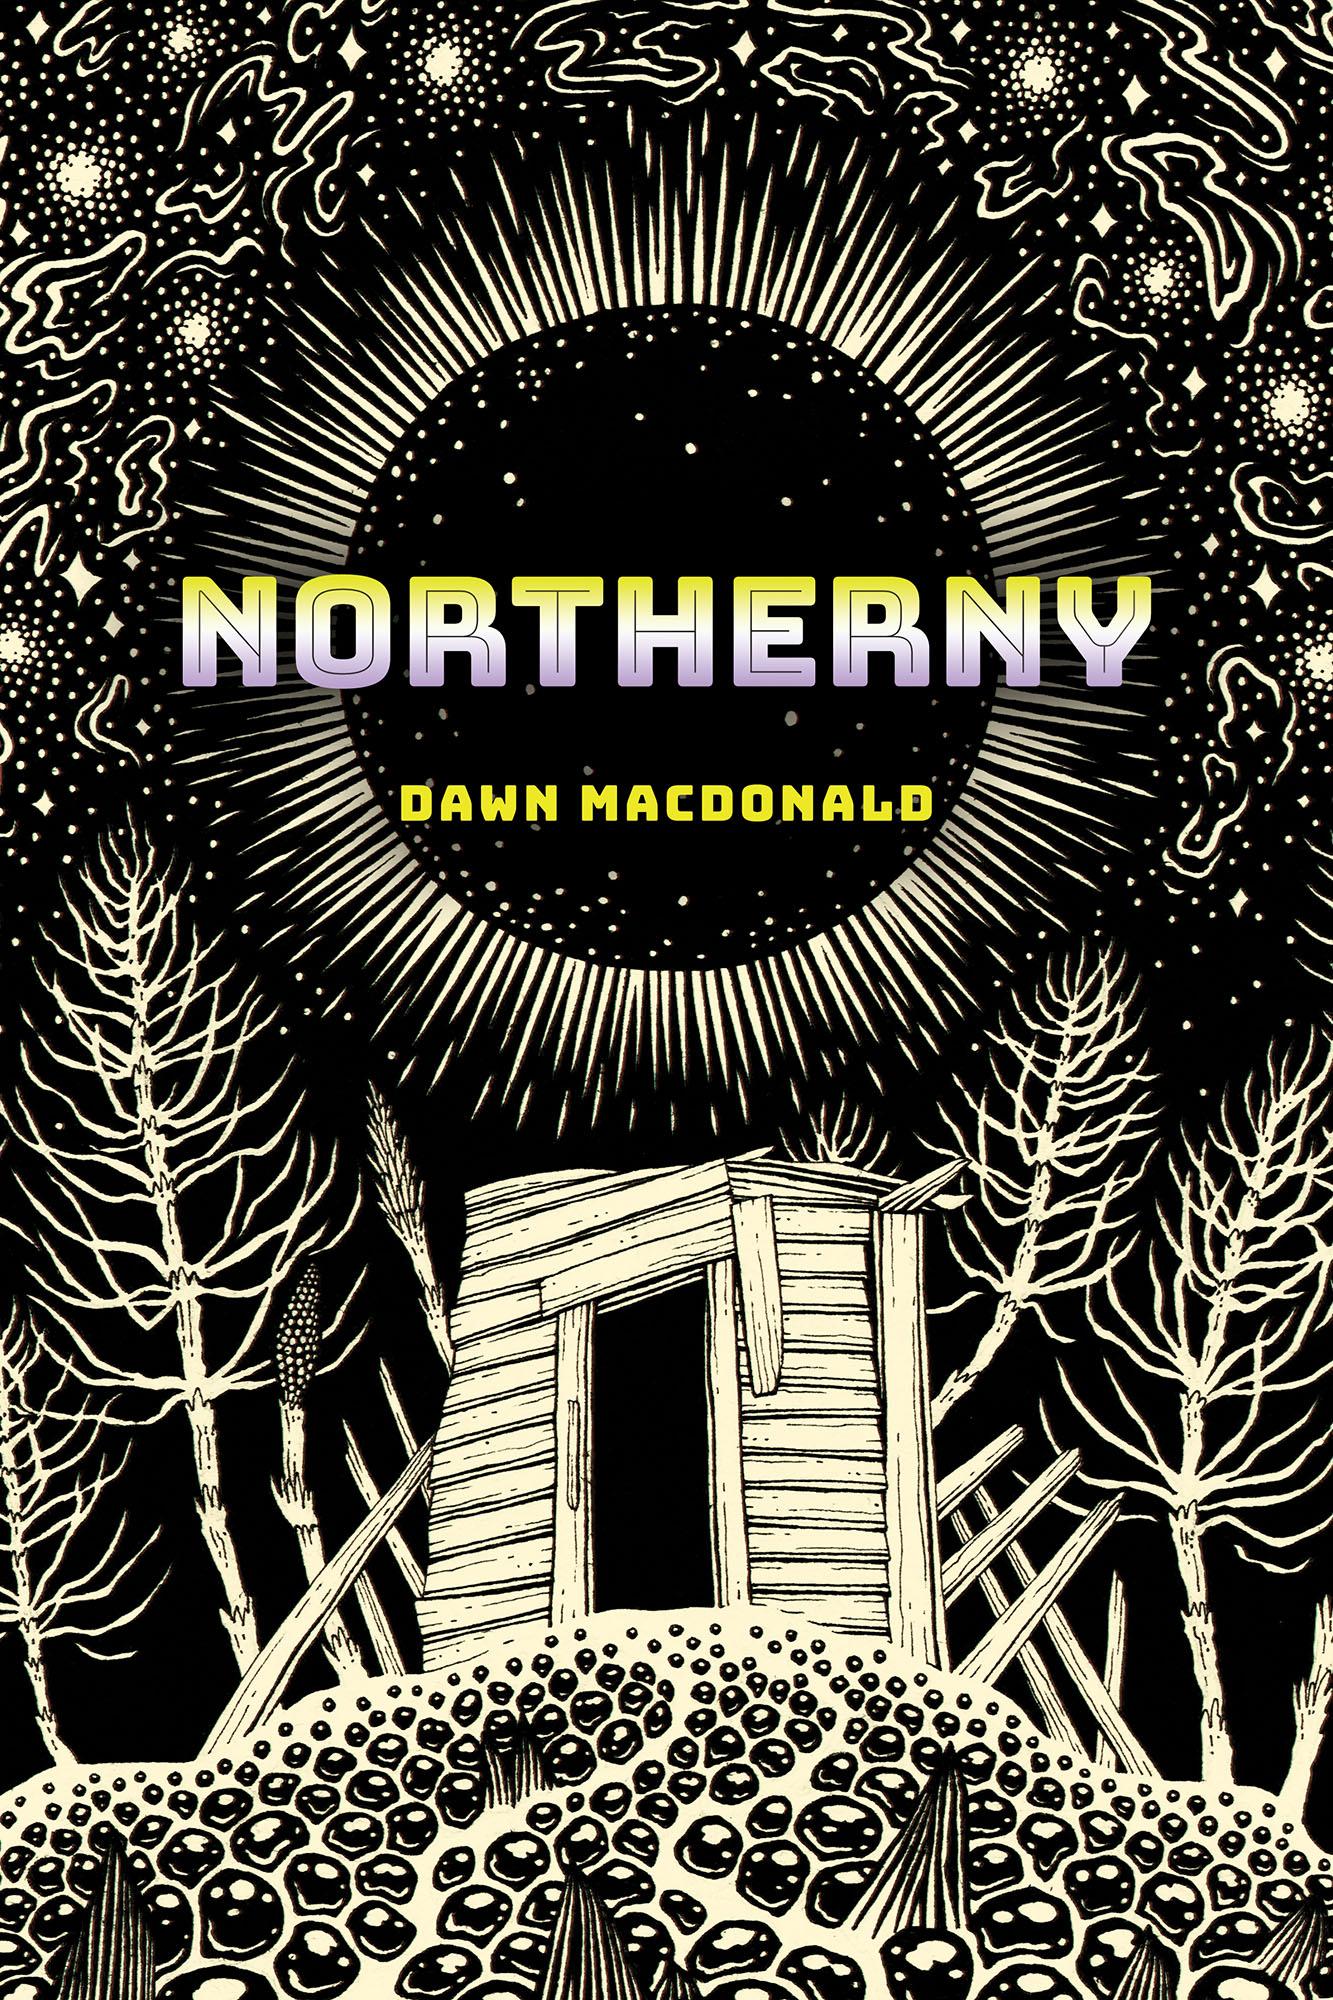 Book cover of Northerny by Dawn Macdonald